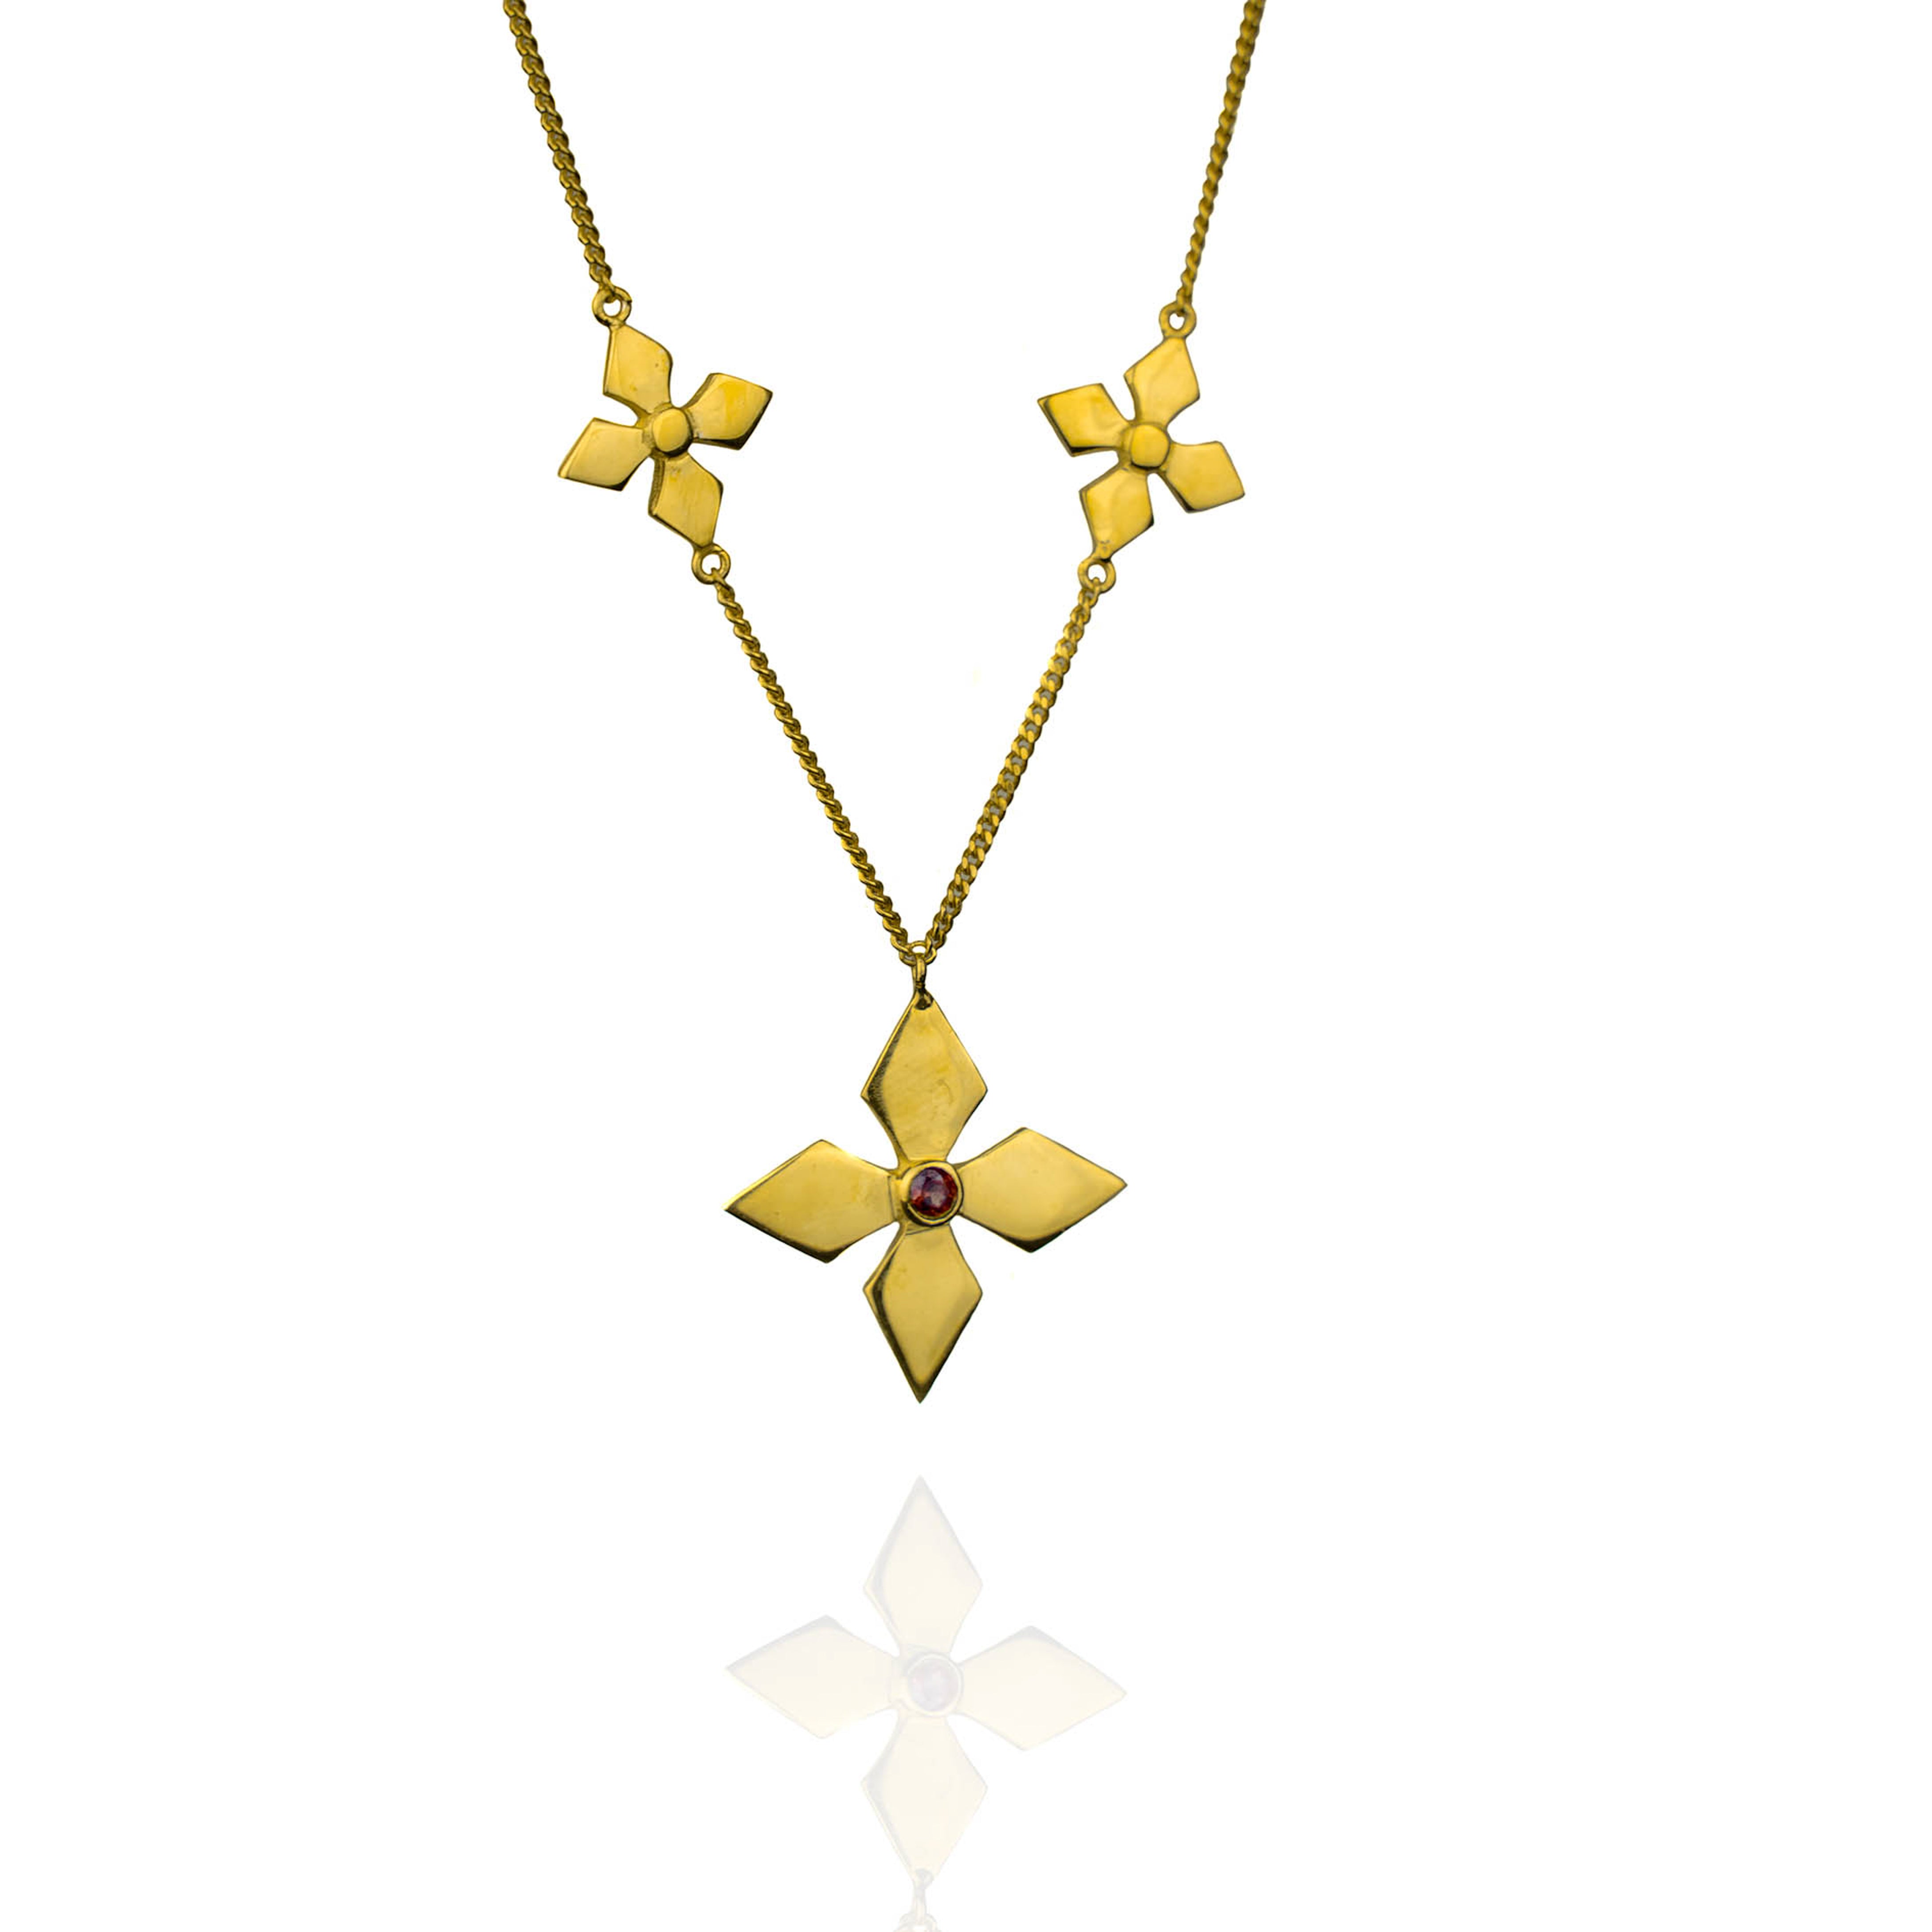 Gold triple blossom necklace with garnet